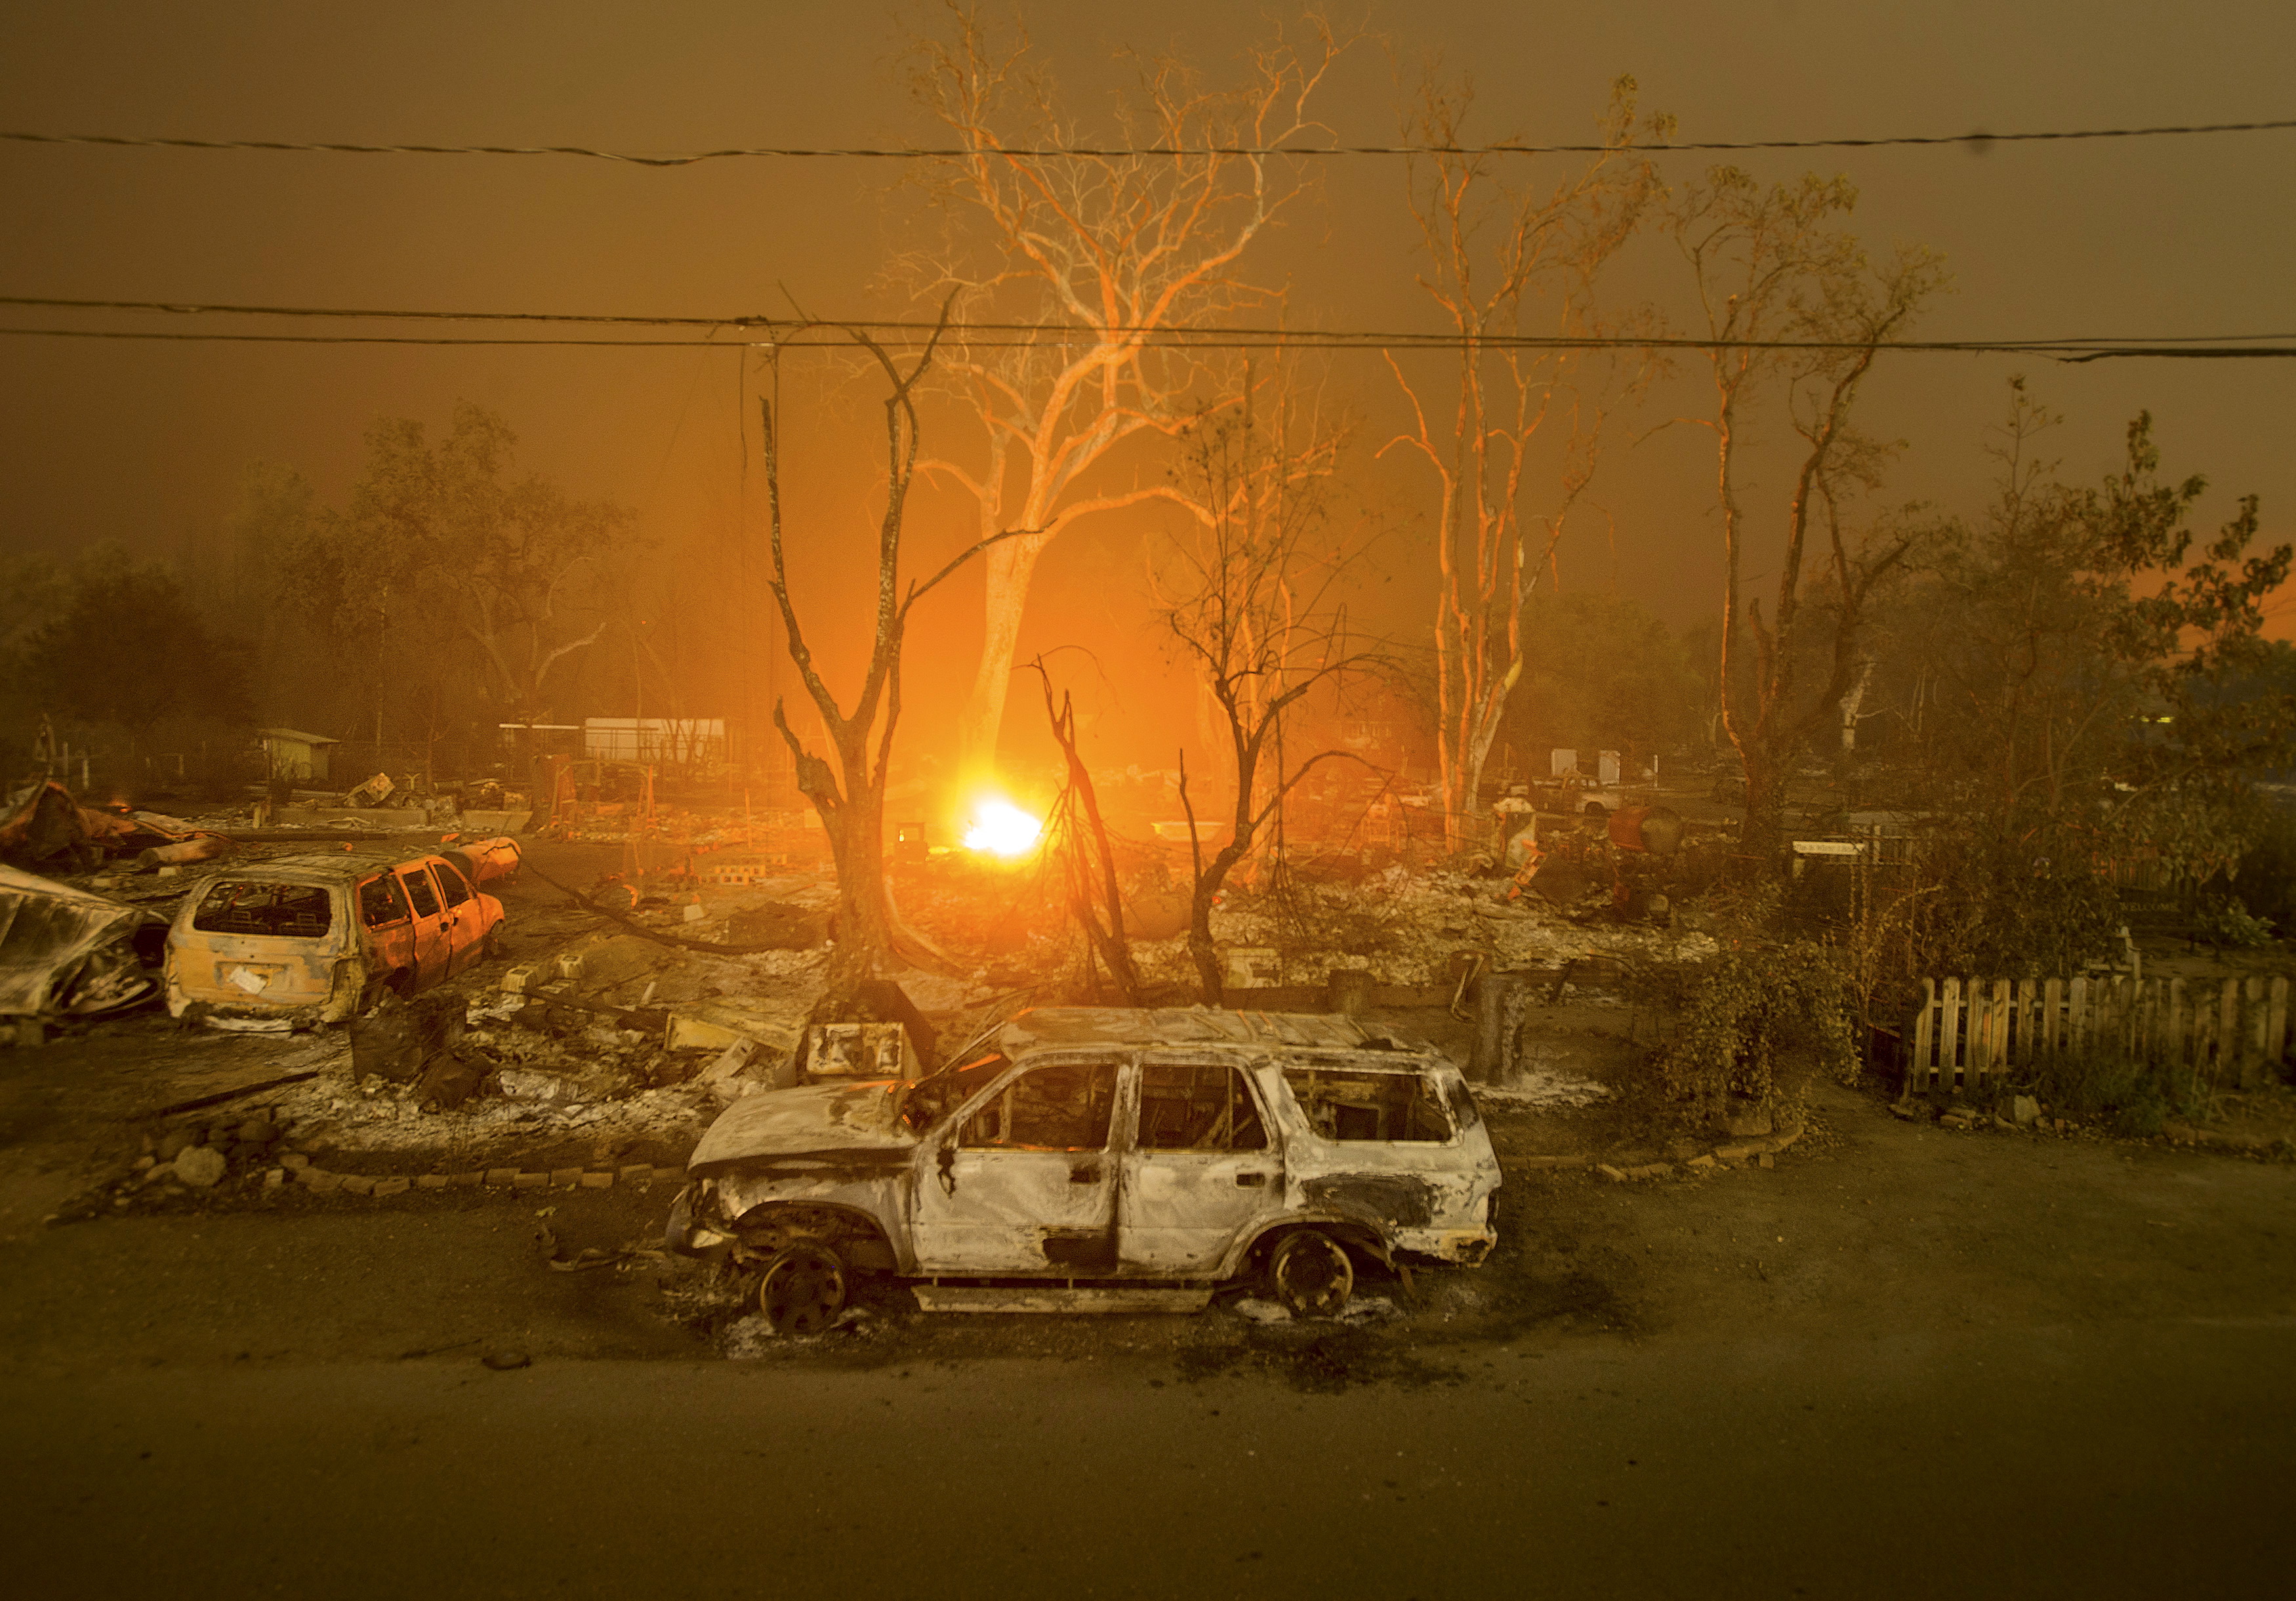 Burned out remains of vehicles and homes scorched by the Valley Fire line Wardlaw St. in Middletown, California September 13, 2015. (Photo: REUTERS/Noah Berger/Newscom)